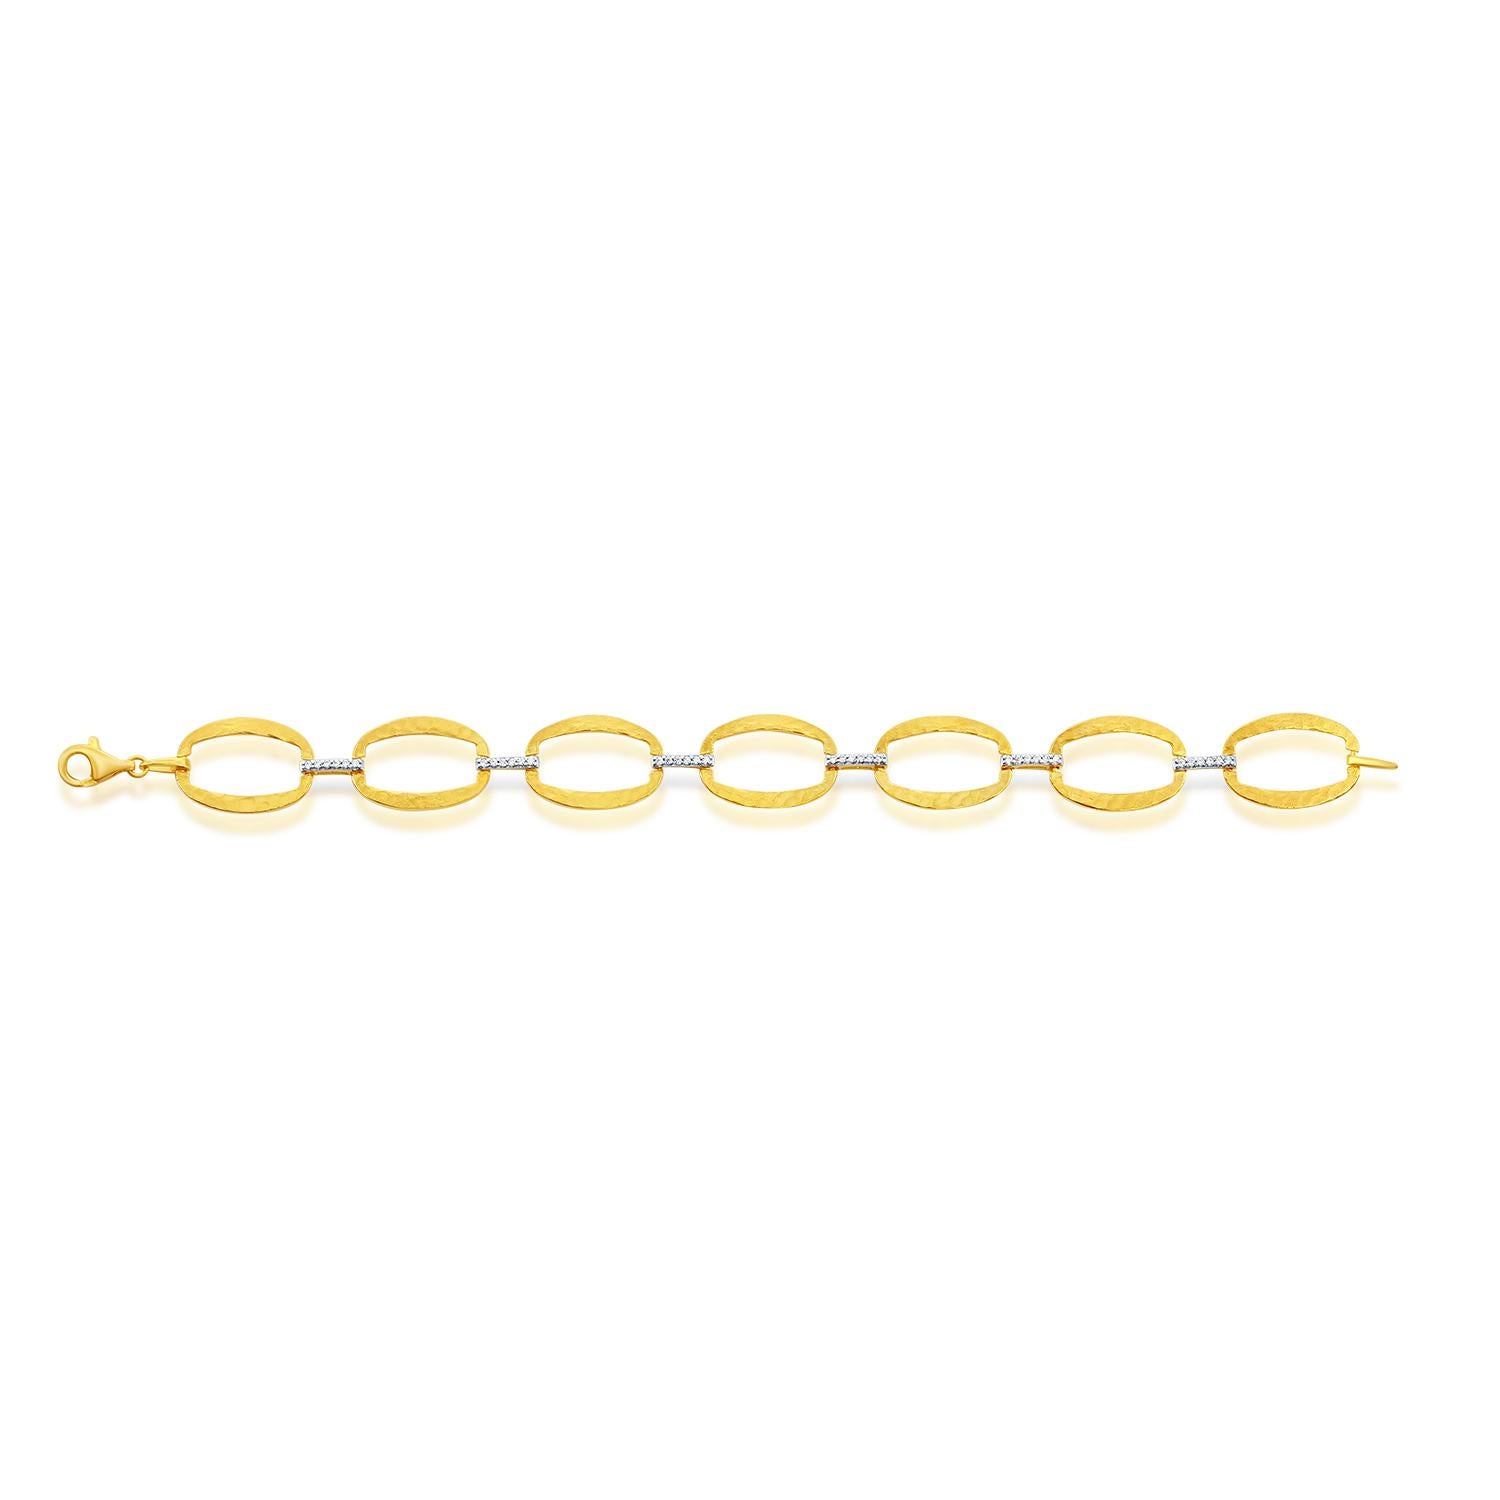 14 Karat Yellow Gold Matte and Hammer-Finished Oval-Shaped Open Link Bracelet, Accented with 0.22 Carats of Pave Set Diamonds.
